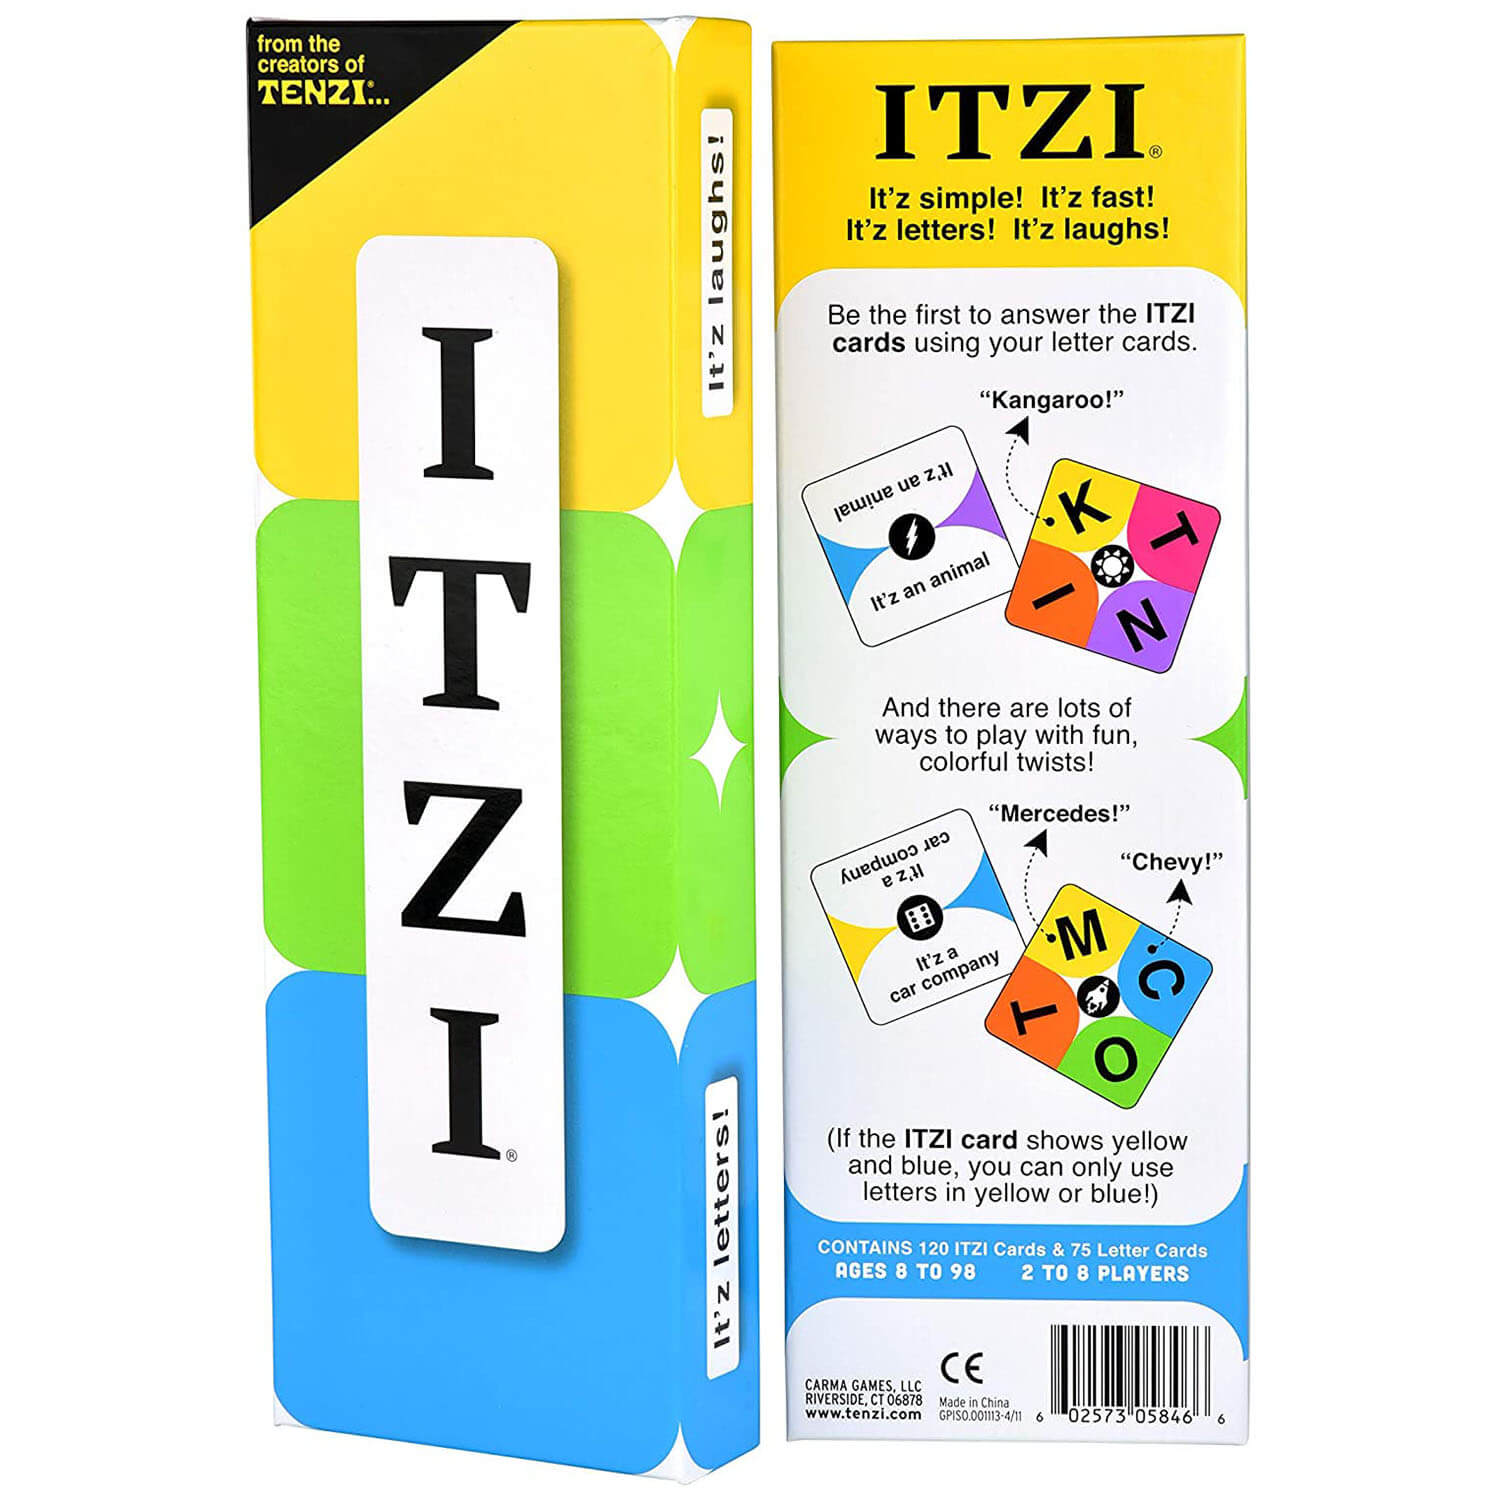 Open view of the ITZI Game